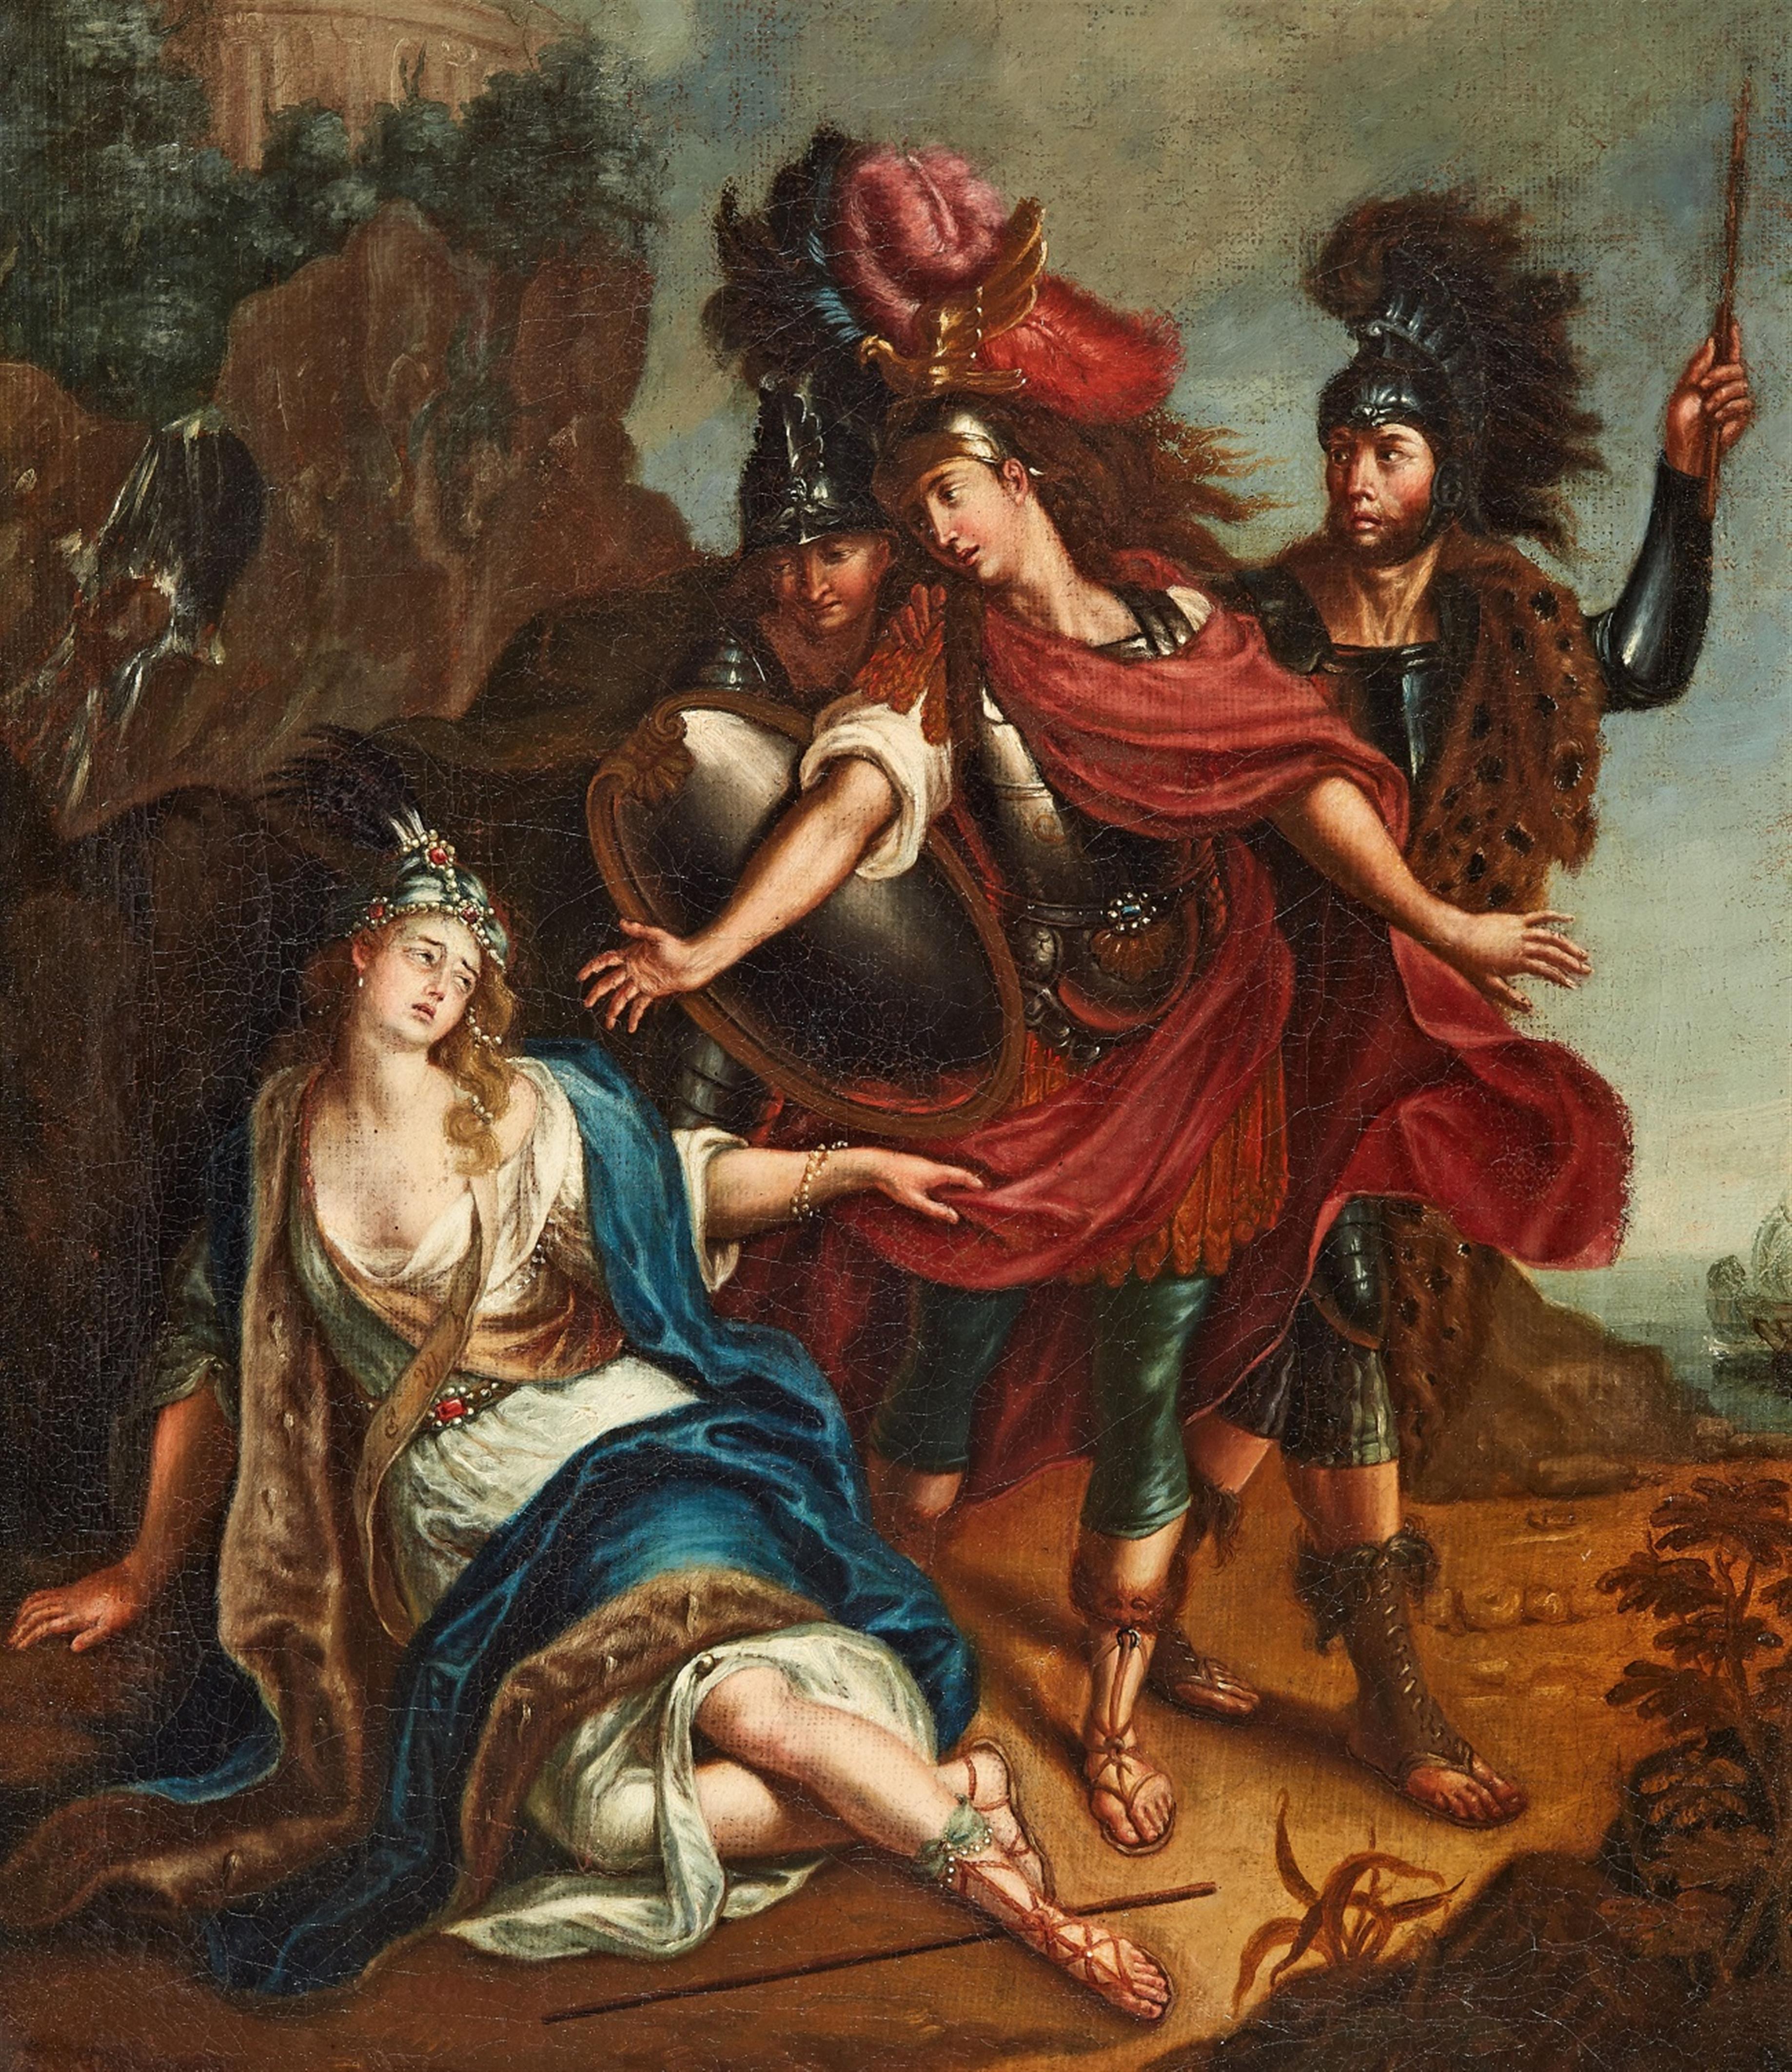 German School, late 17th century - Achilles and the dying Penthesilea - image-1